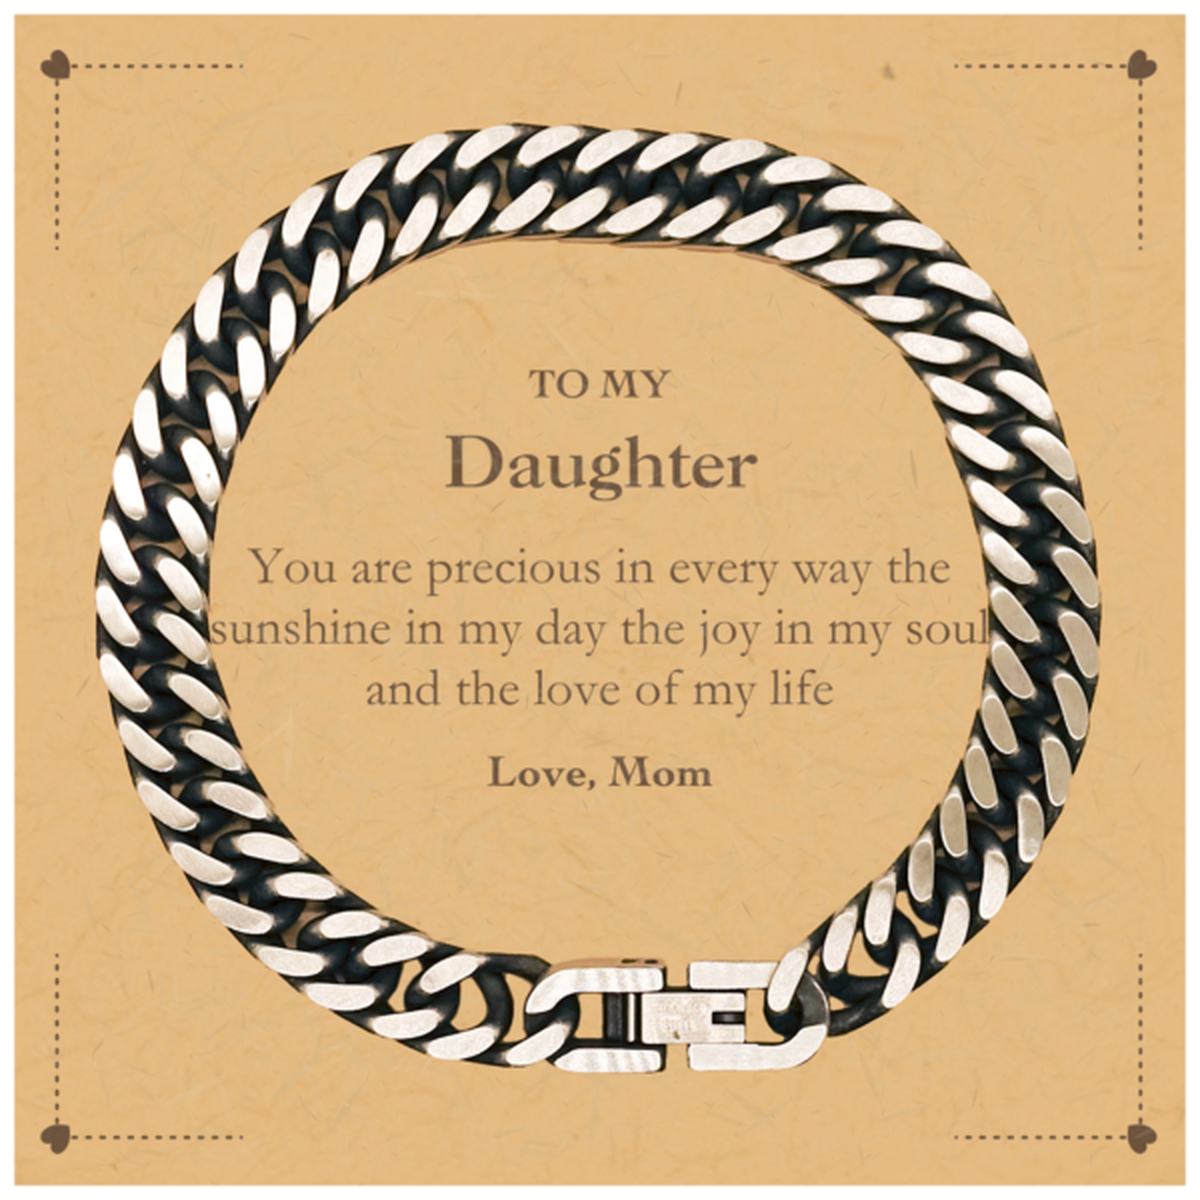 Graduation Gifts for Daughter Cuban Link Chain Bracelet Present from Mom, Christmas Daughter Birthday Gifts Daughter You are precious in every way the sunshine in my day. Love, Mom